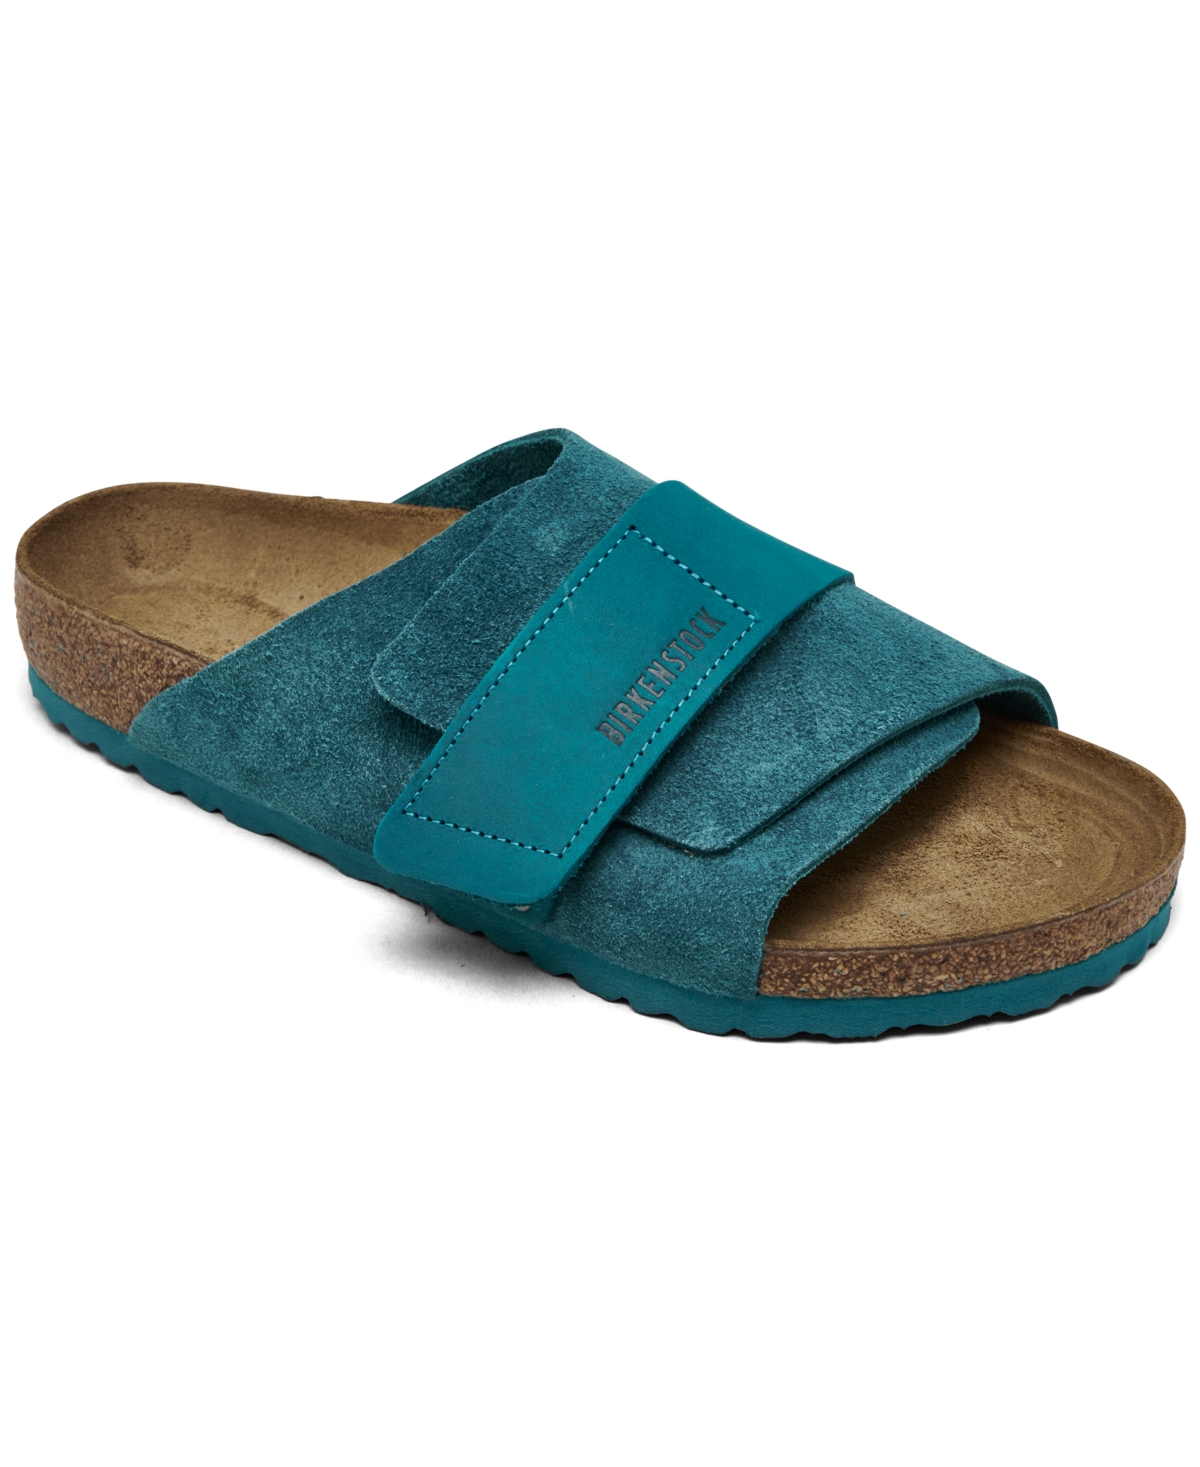 Men's Kyoto Suede Leather Slide Sandals from Finish Line - Deep Turquoise